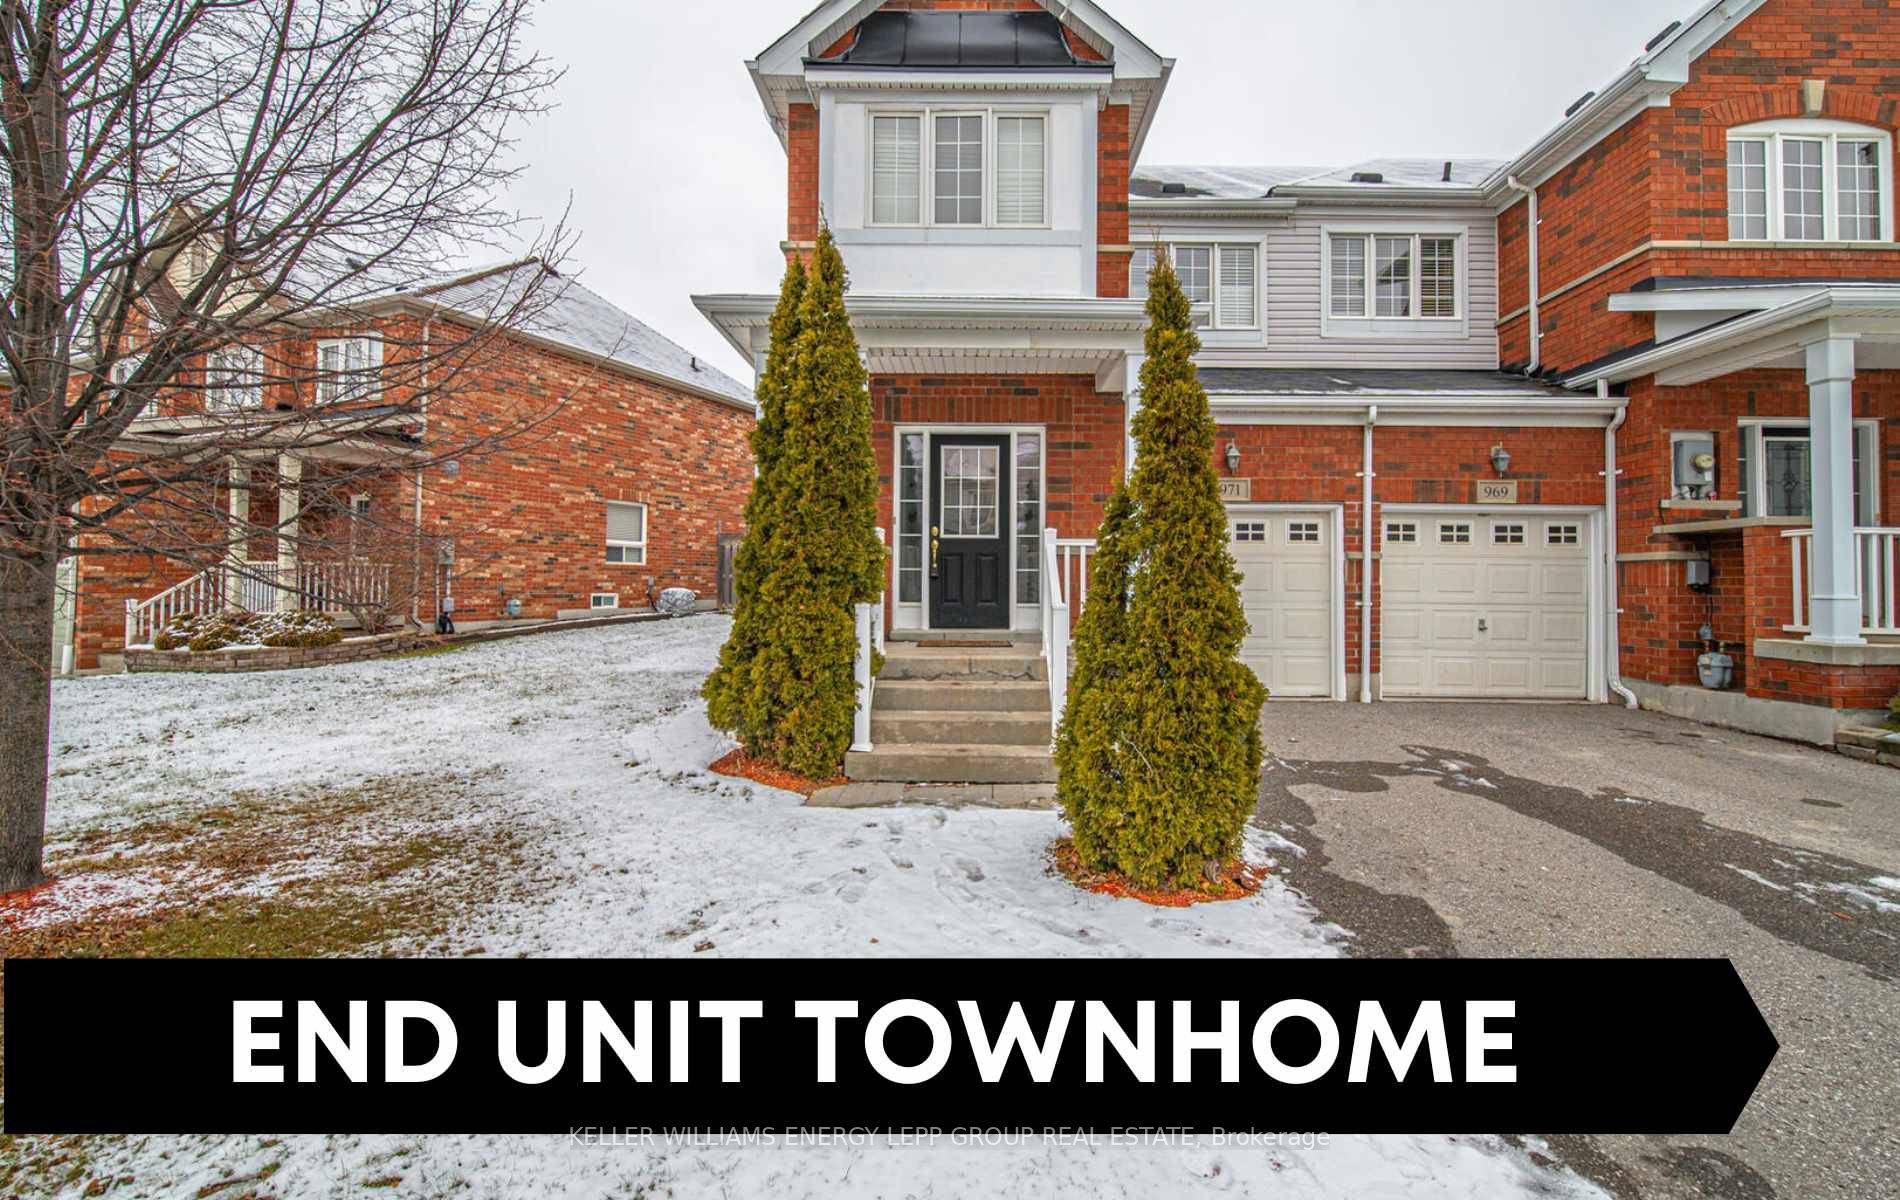 Spacious 3 bedroom end unit 2 storey town home with approximately 1900 square feet of living space in highly desirable Oshawa neighbourhood.